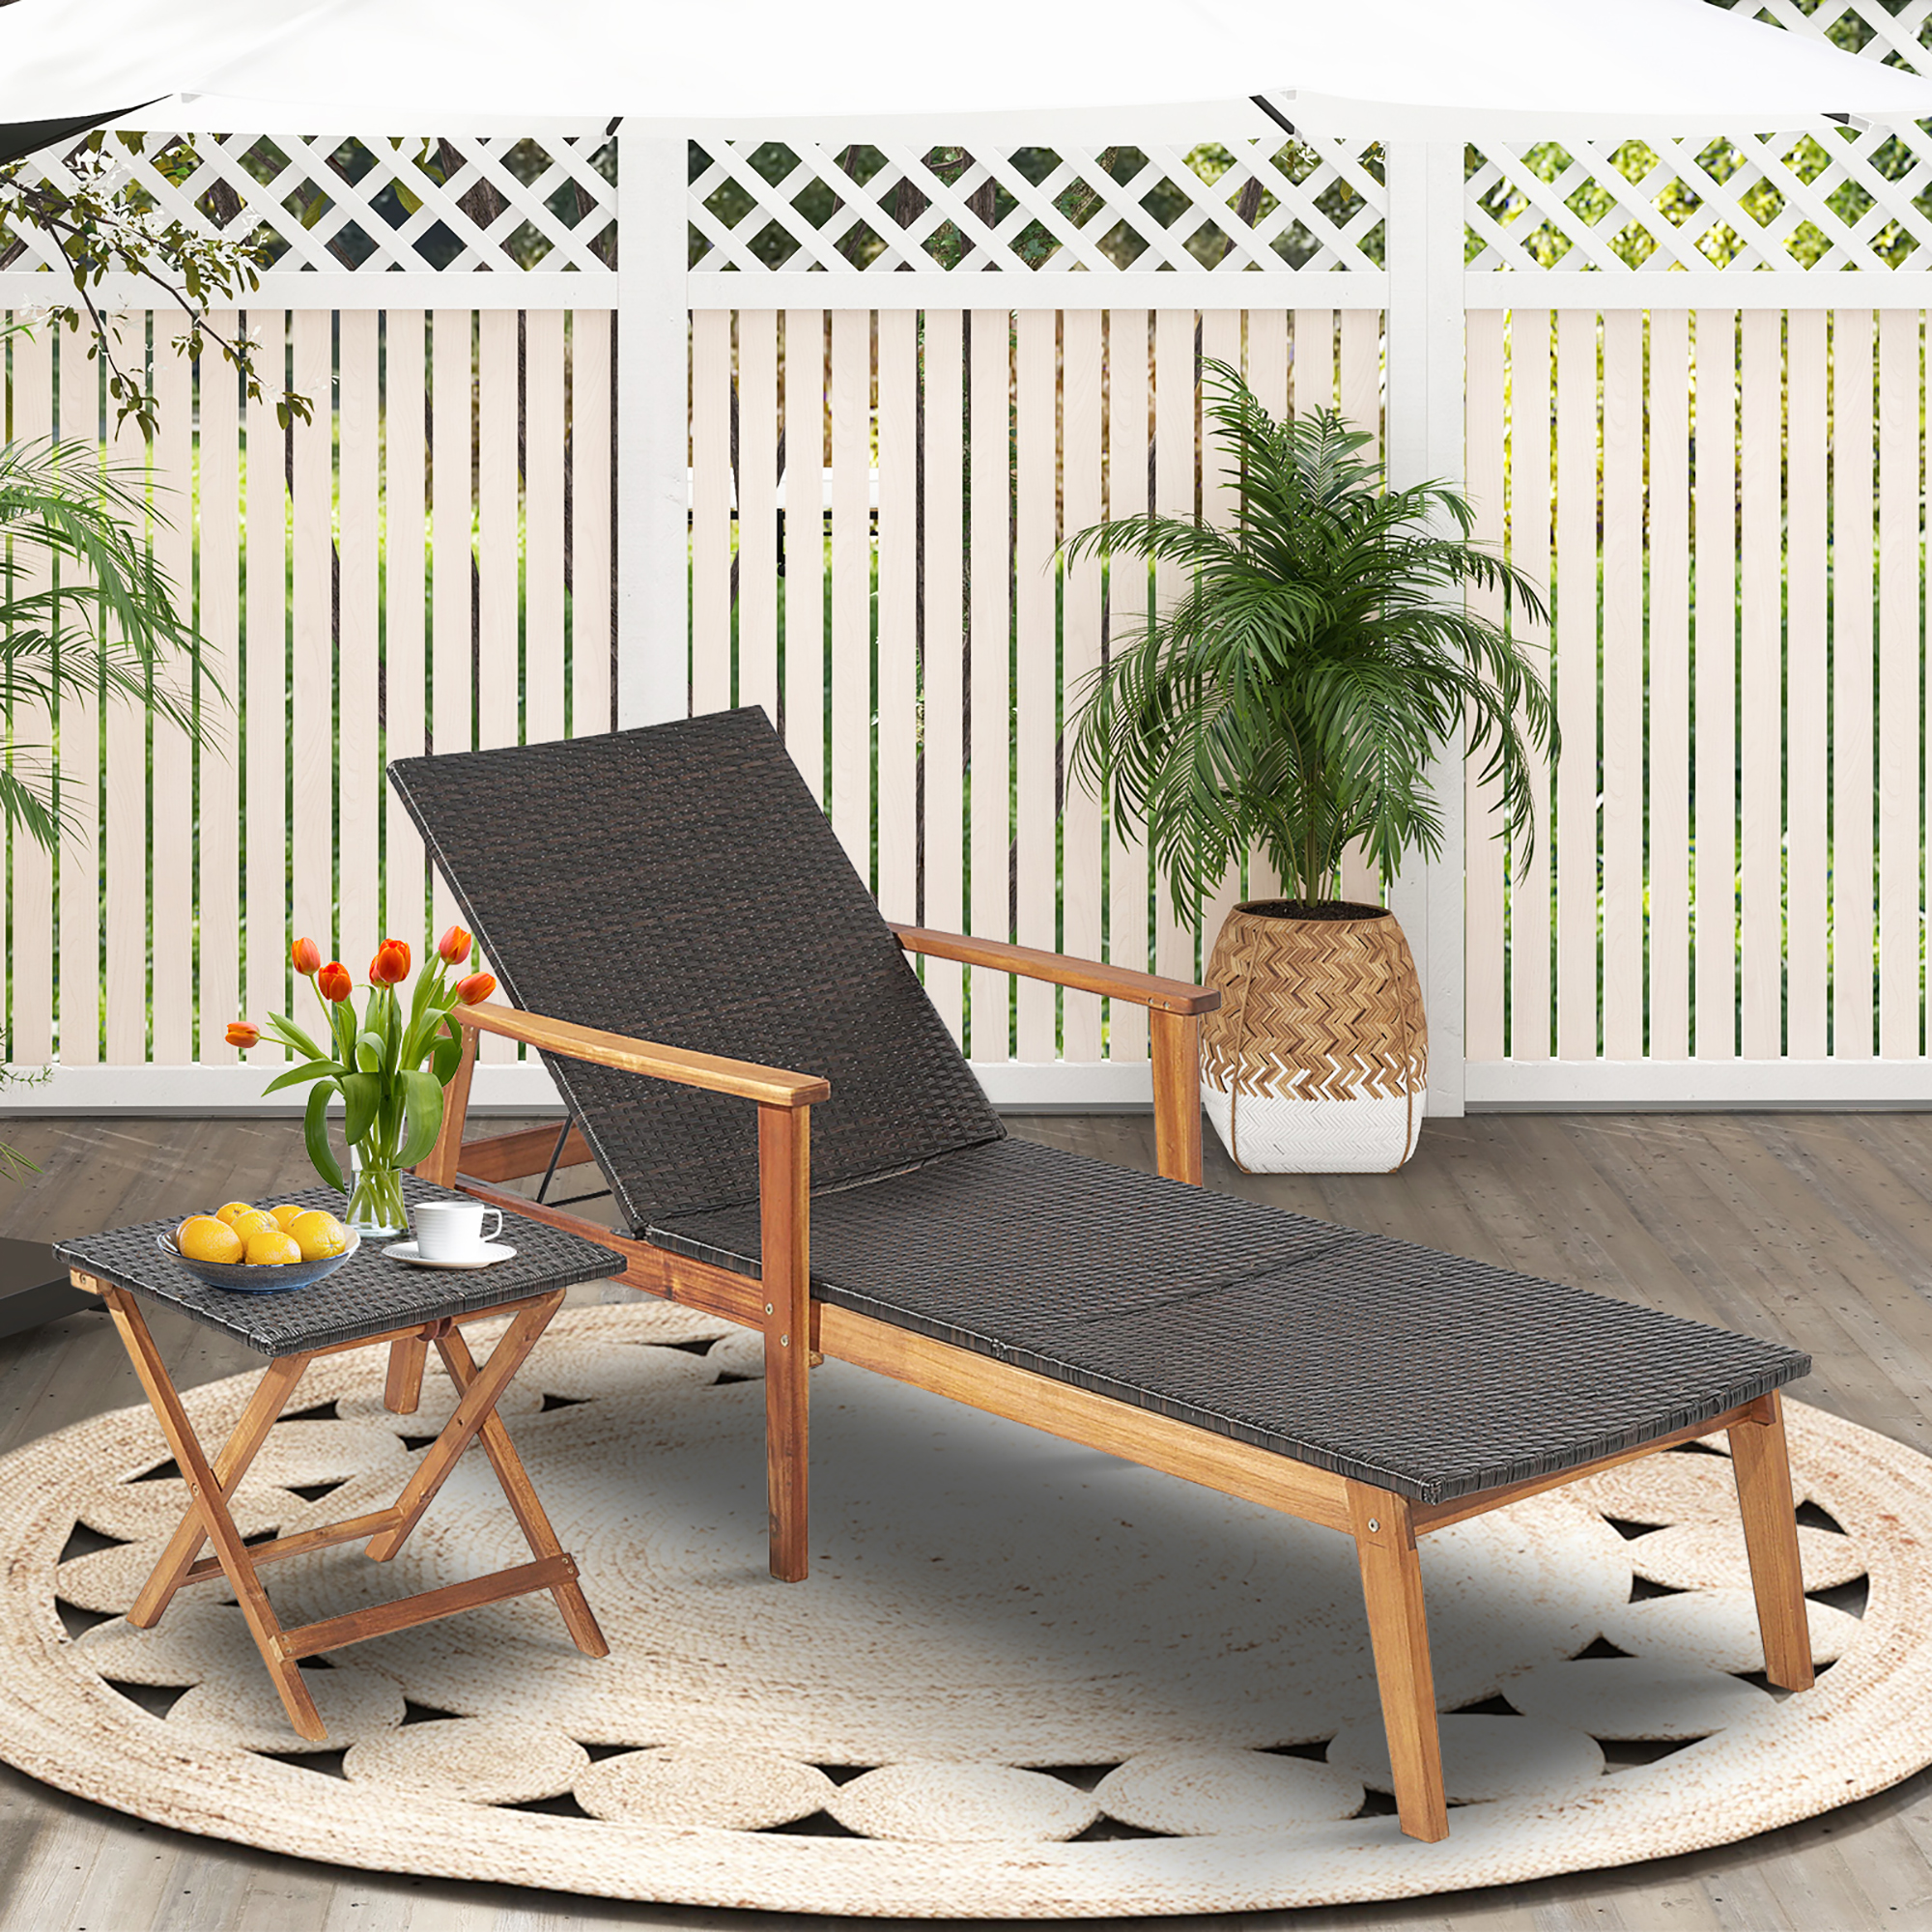 Costway Patio Rattan Chaise Lounge Chair Recliner Back Adjustable Acacia Wood Garden - image 3 of 8